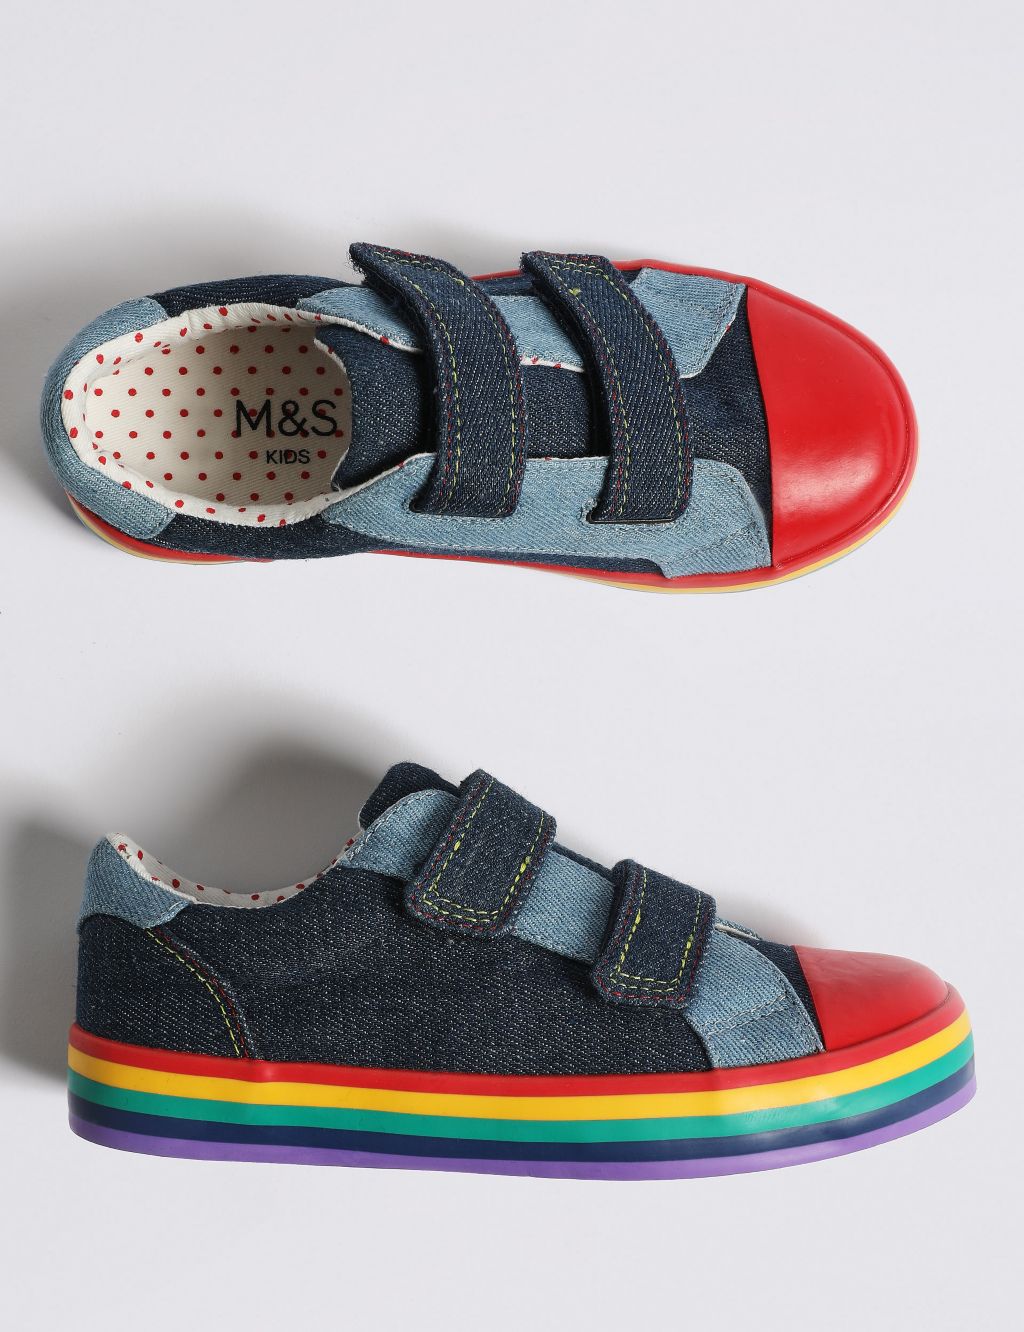 Kids' Rainbow Fashion Trainers (5 Small - 12 Small) 1 of 5